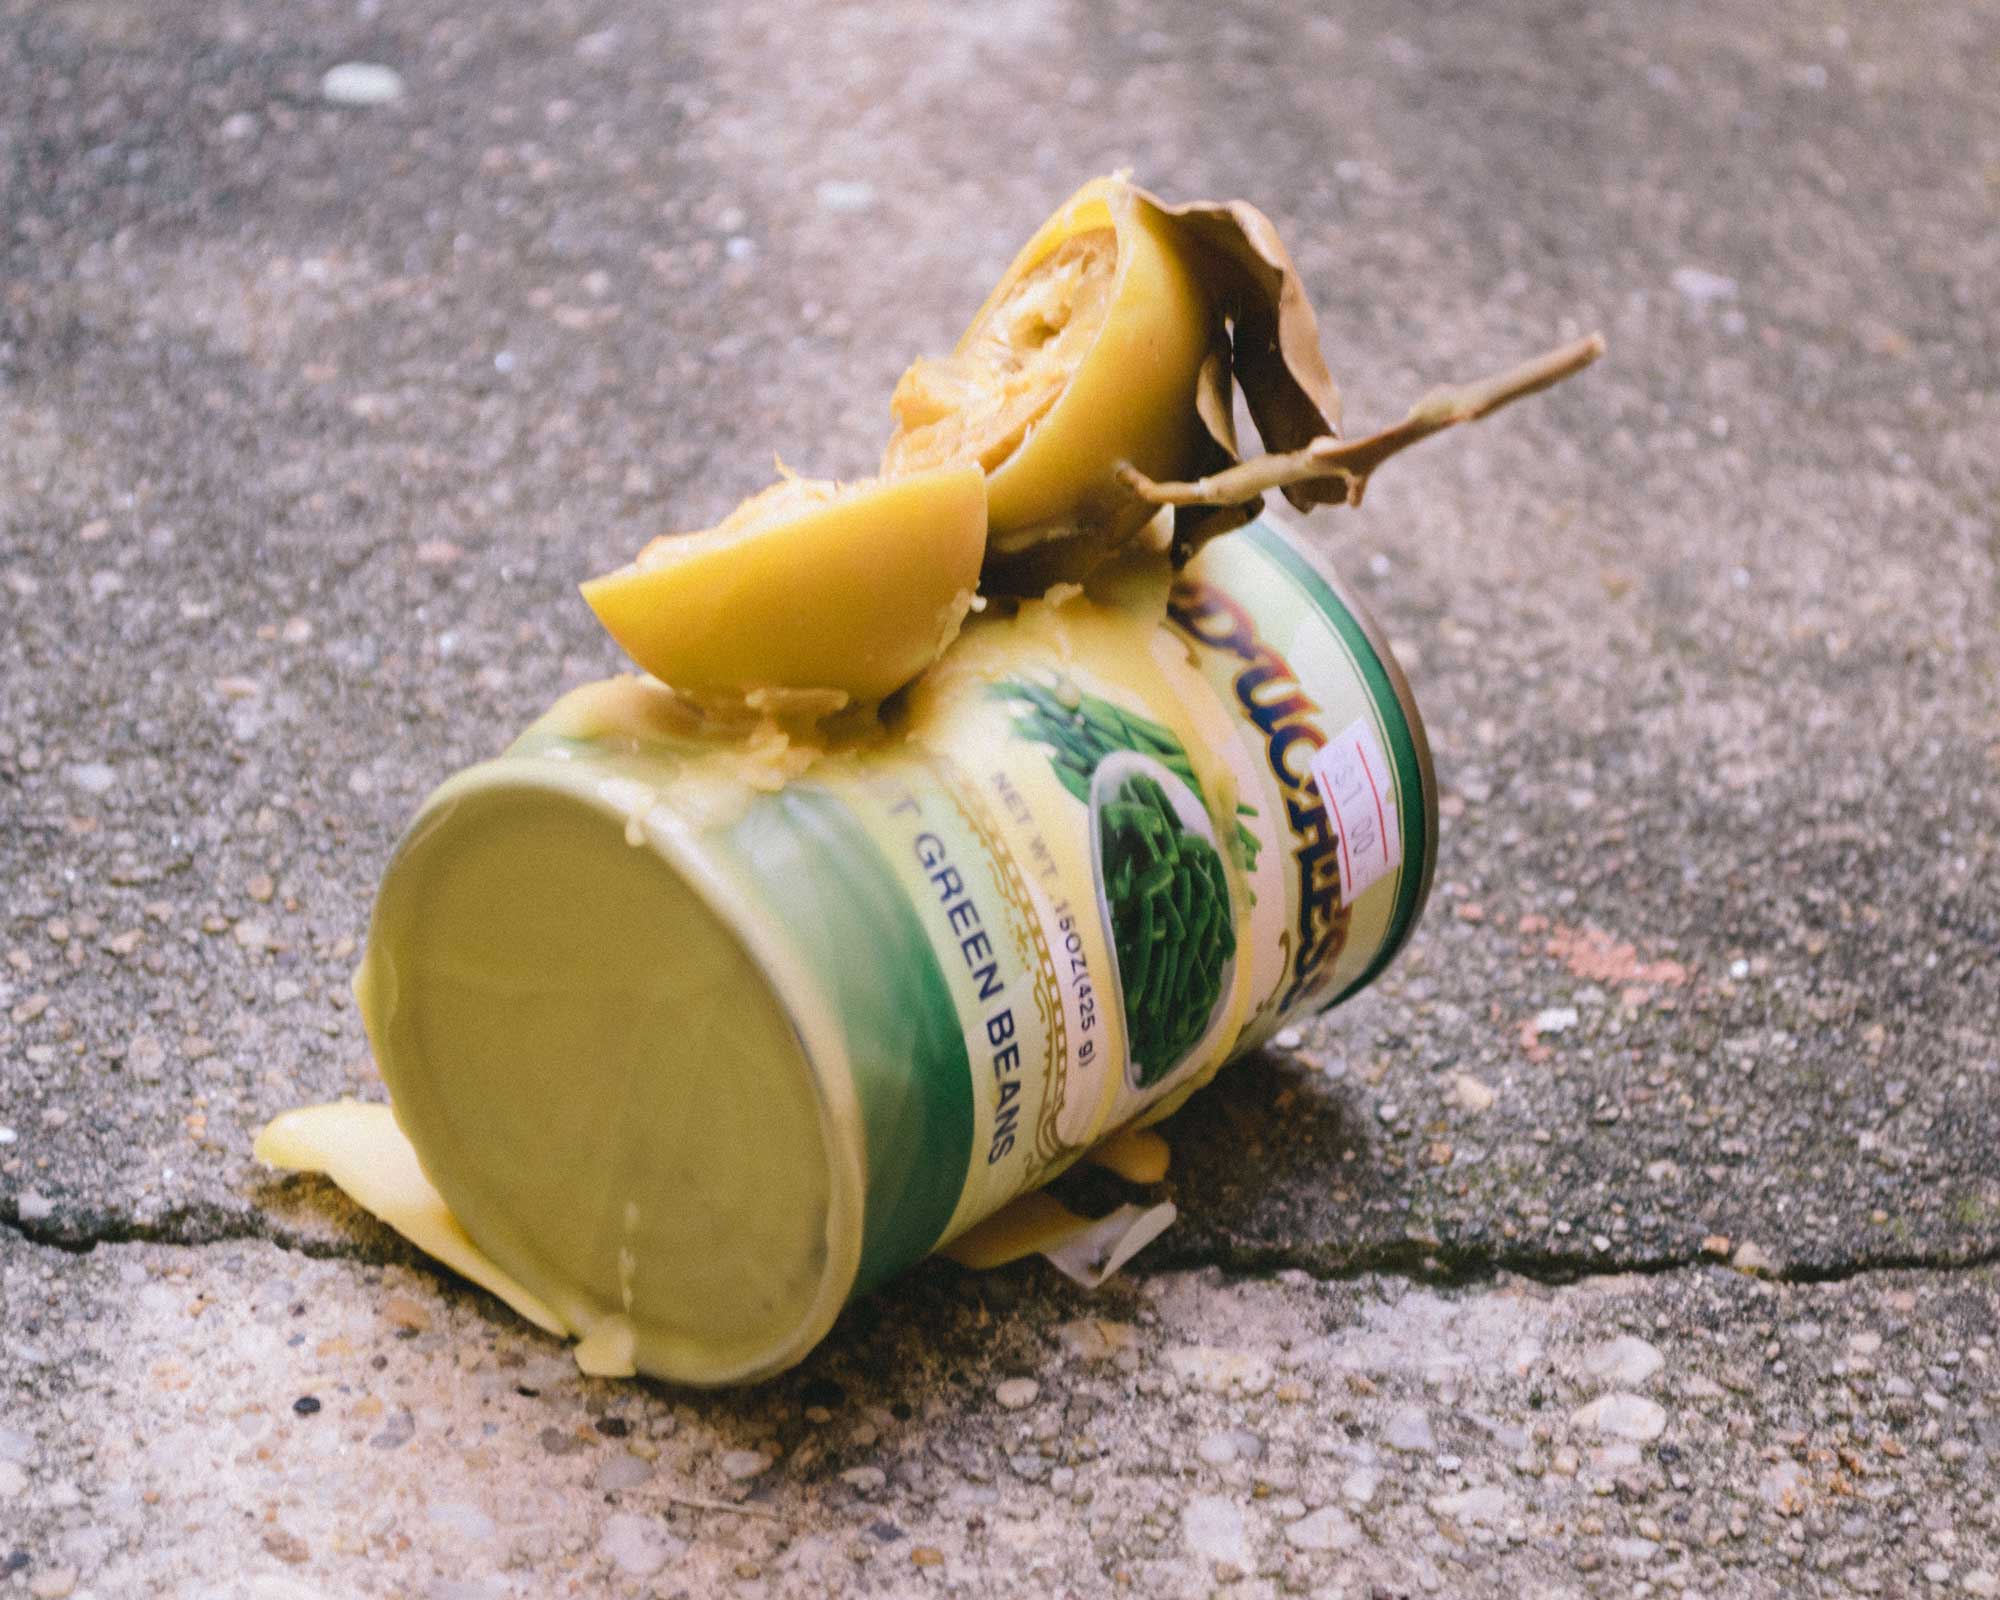 Preserved lemon cut in half sits atop a green aluminum can on its side, the whole of the objects are layered in melted beeswax that has since dried.